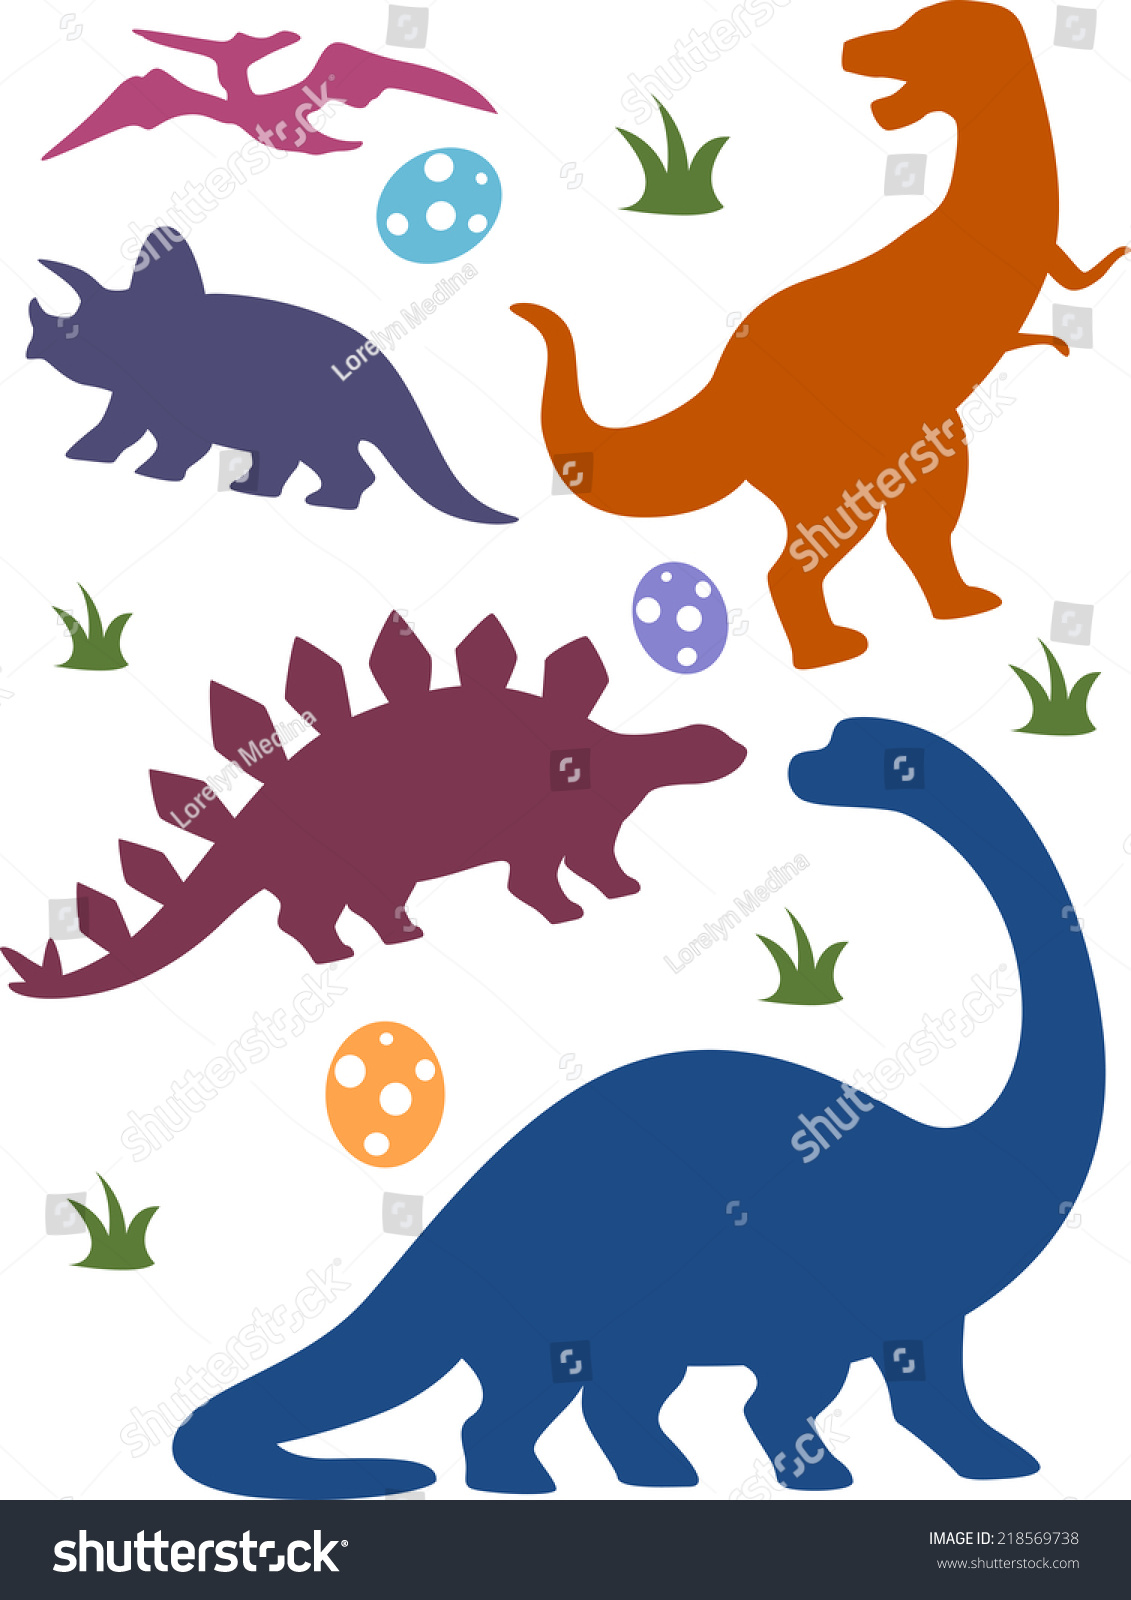 SVG of Illustration Featuring Silhouettes of Different Dinosaurs svg